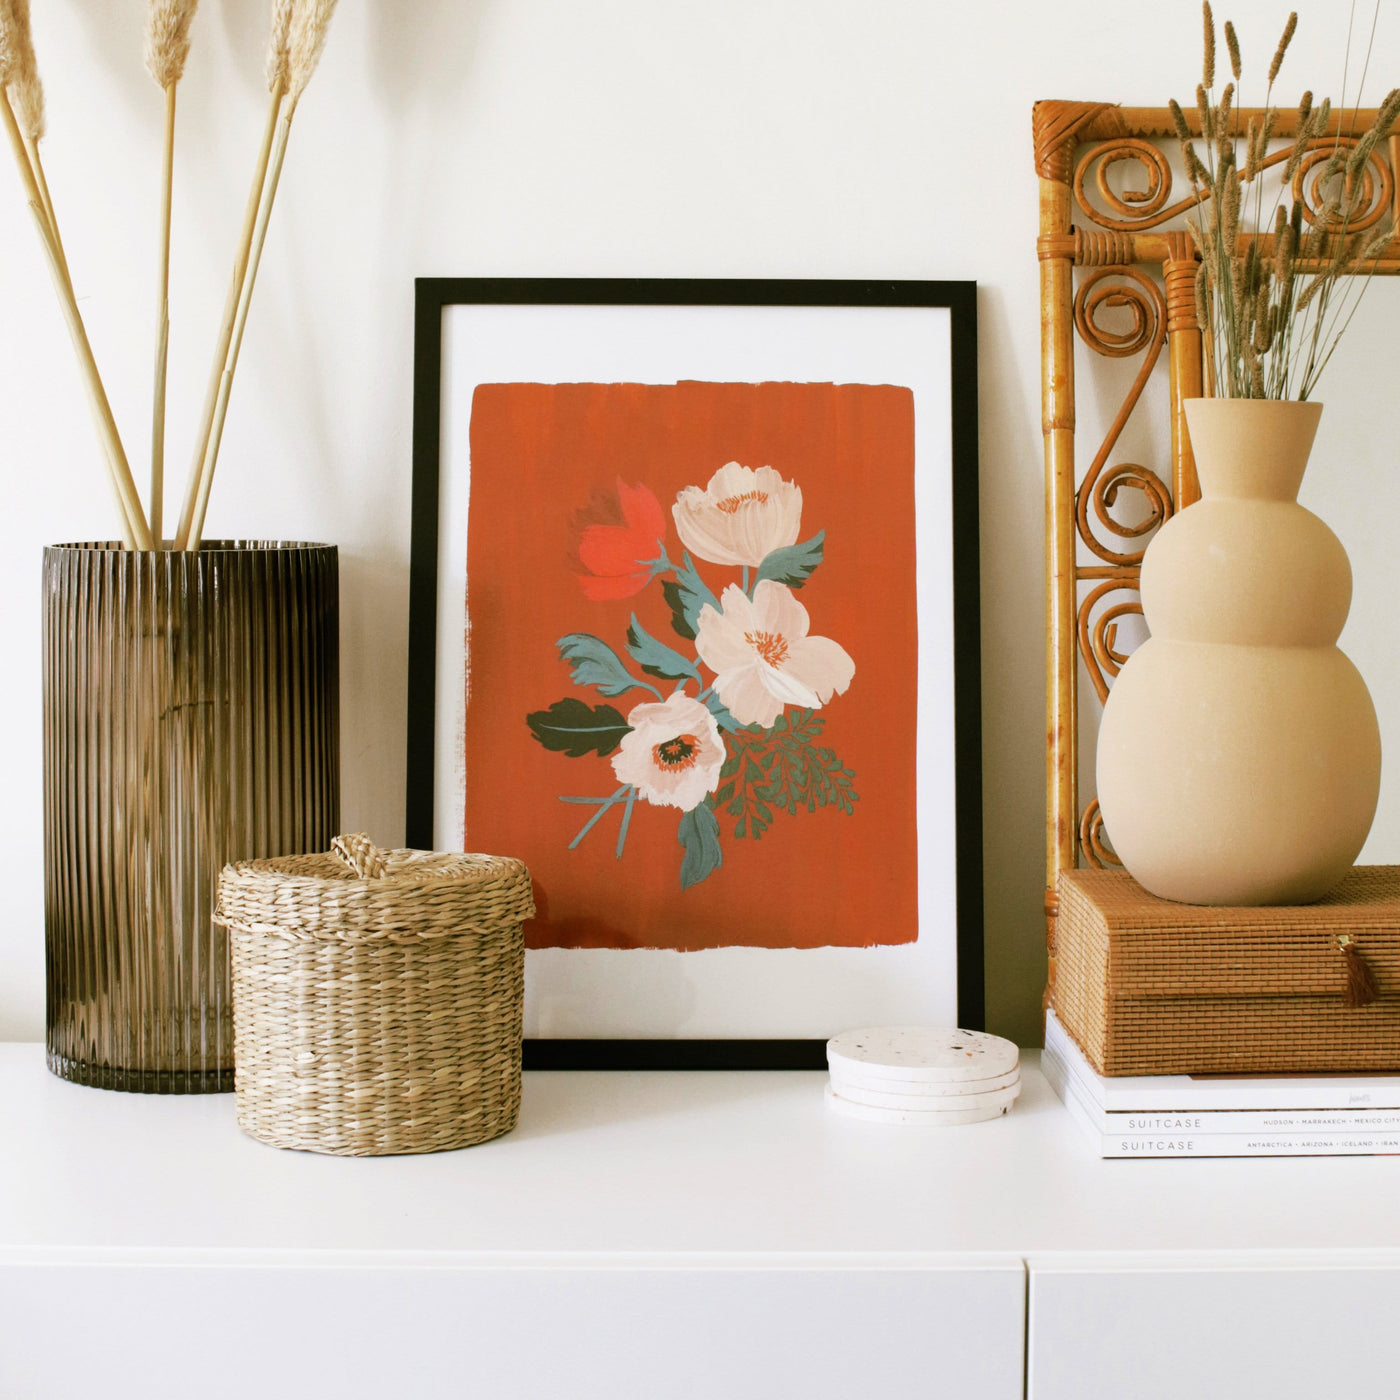 Red Floral Botanical Art Print With A Spray of Anemone Flowers On A Deep Red Background In A Black Frame Next To A Tall Vase And Rattan Pot - Annie Dornan Smith